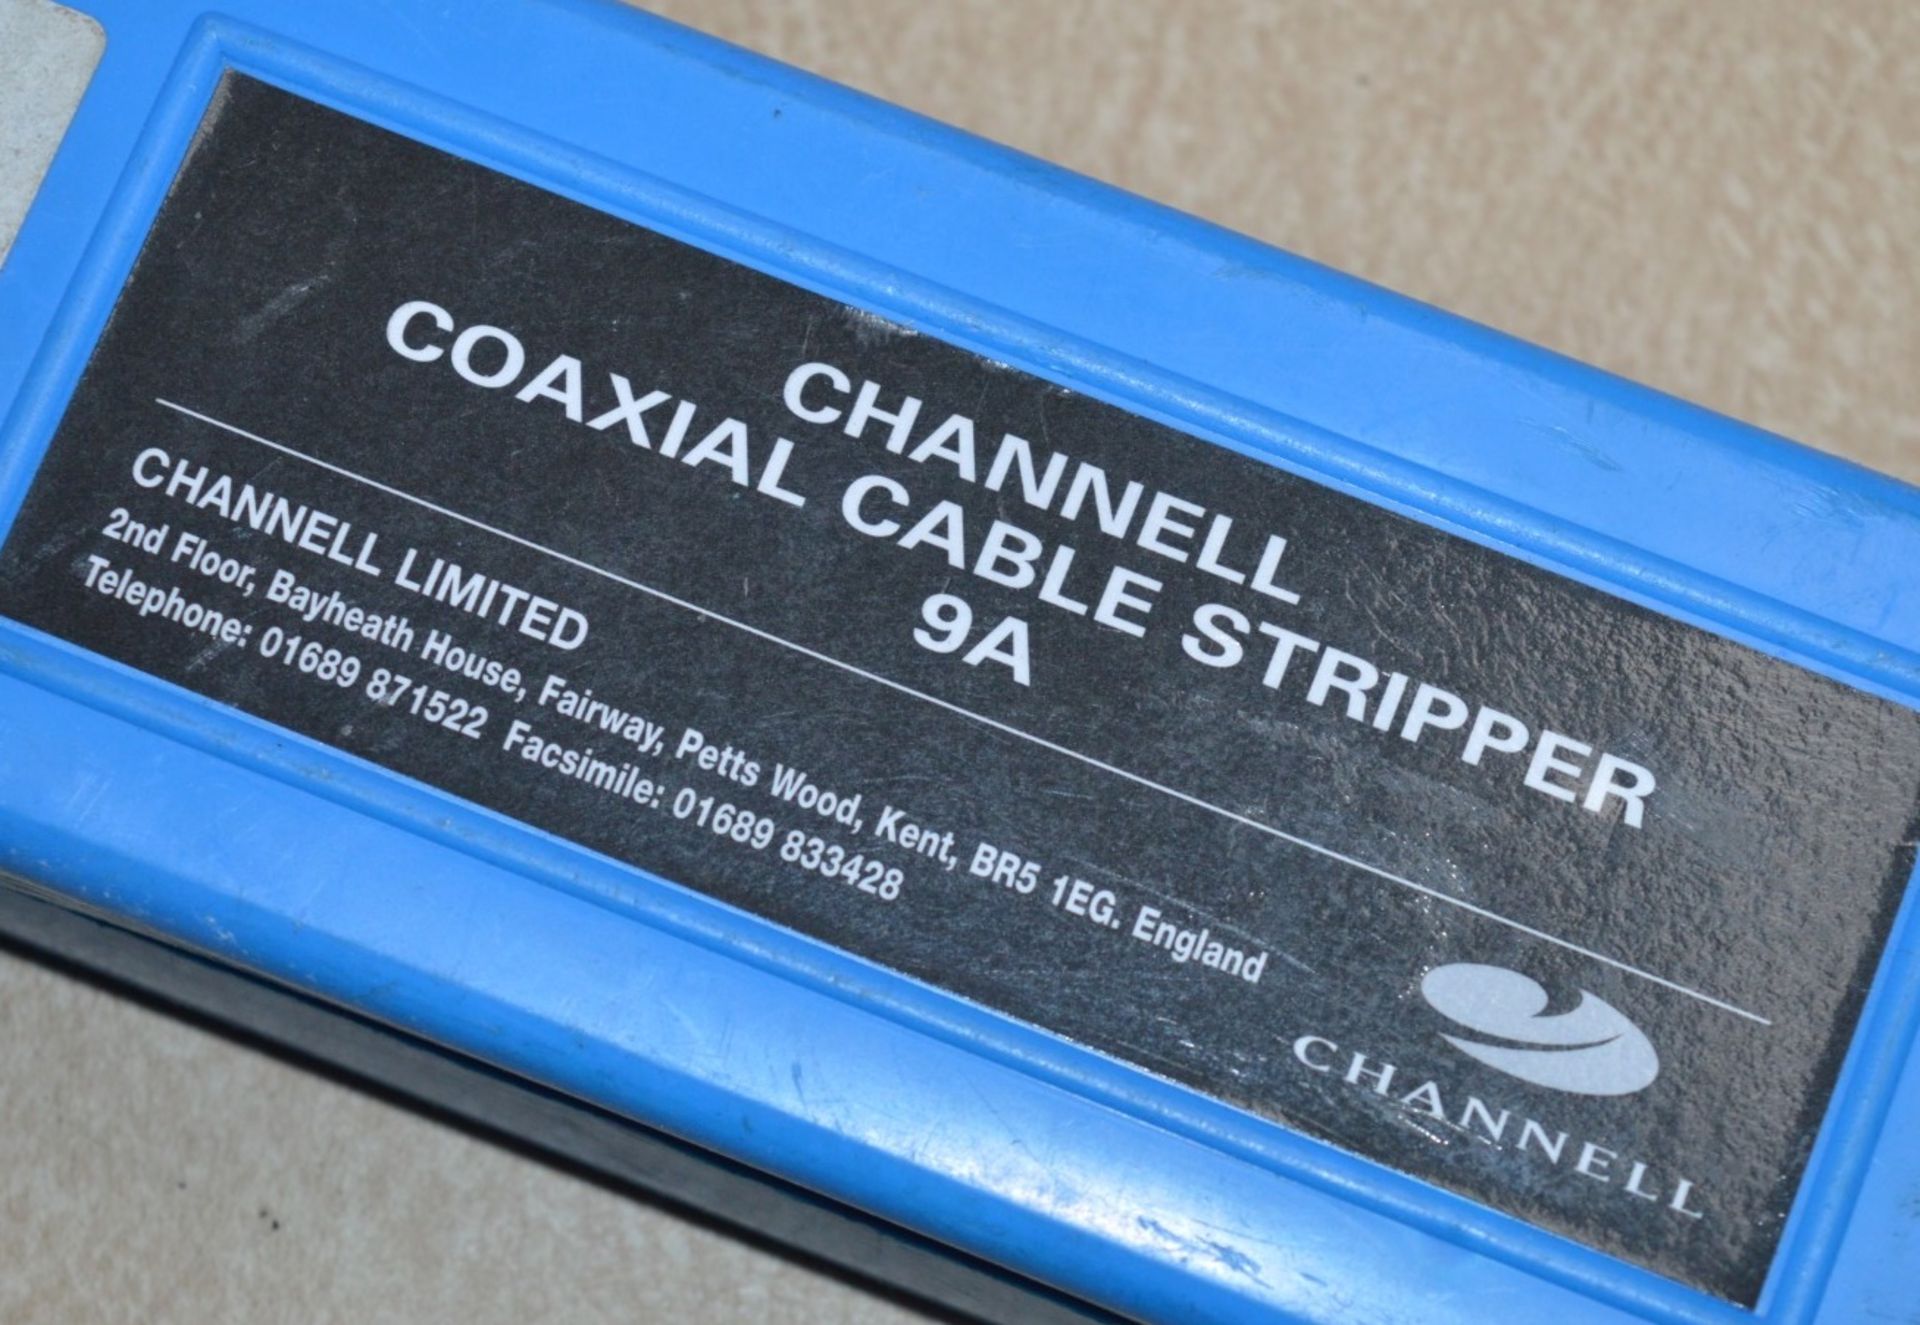 4 x Channell Coaxial Cable Strippers - Model 9A - In Cases With Accessories - CL011 - Ref JP936 - - Image 6 of 6